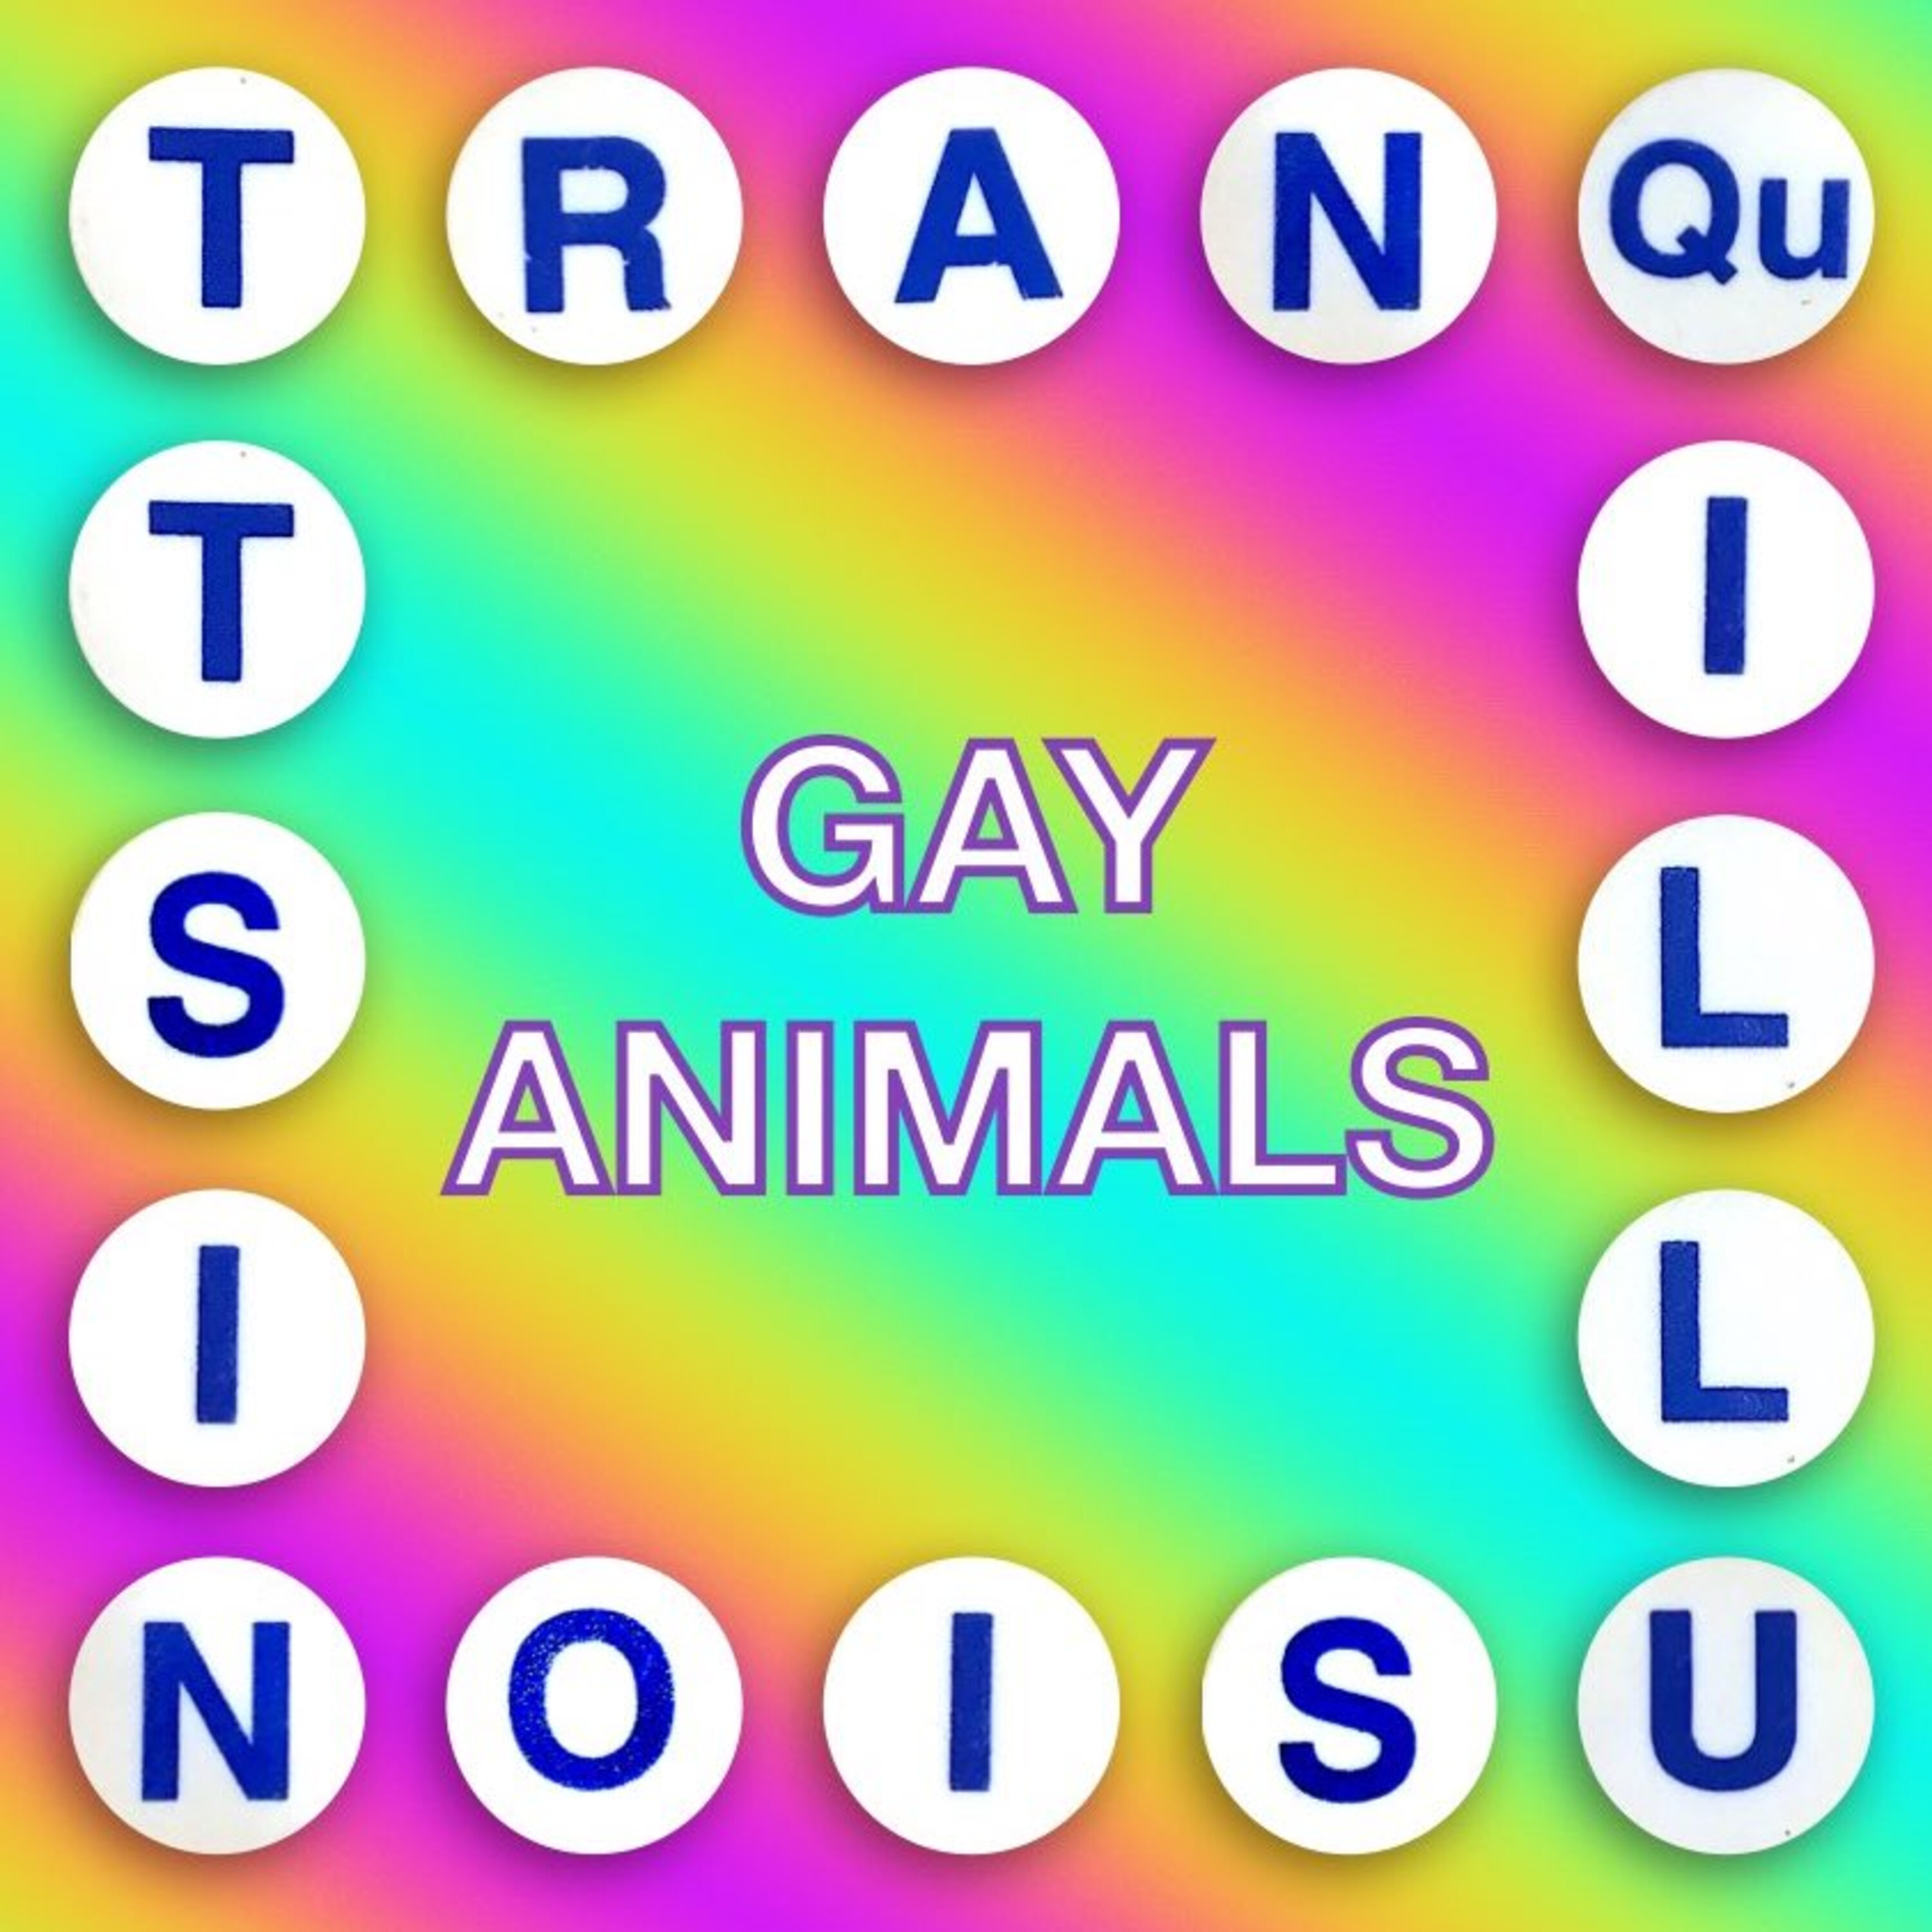 Thumbnail for "Tranquillusionist: Gay Animals".